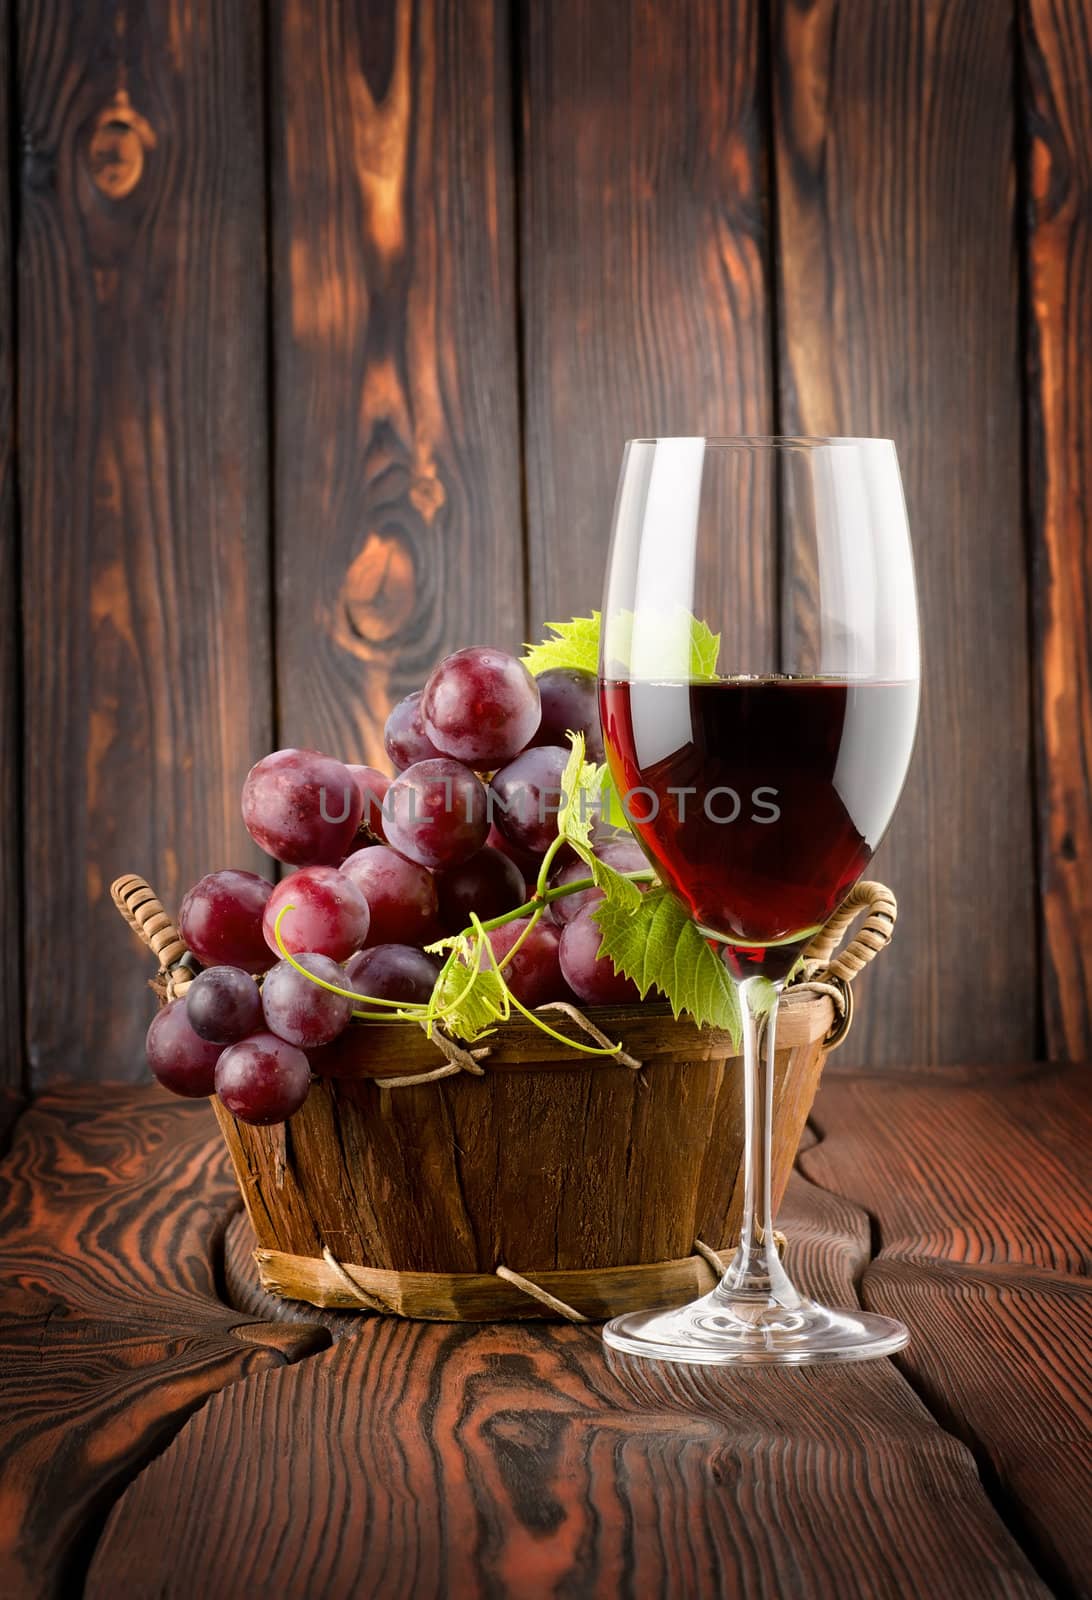 Wine glass and grapes in a basket by Givaga